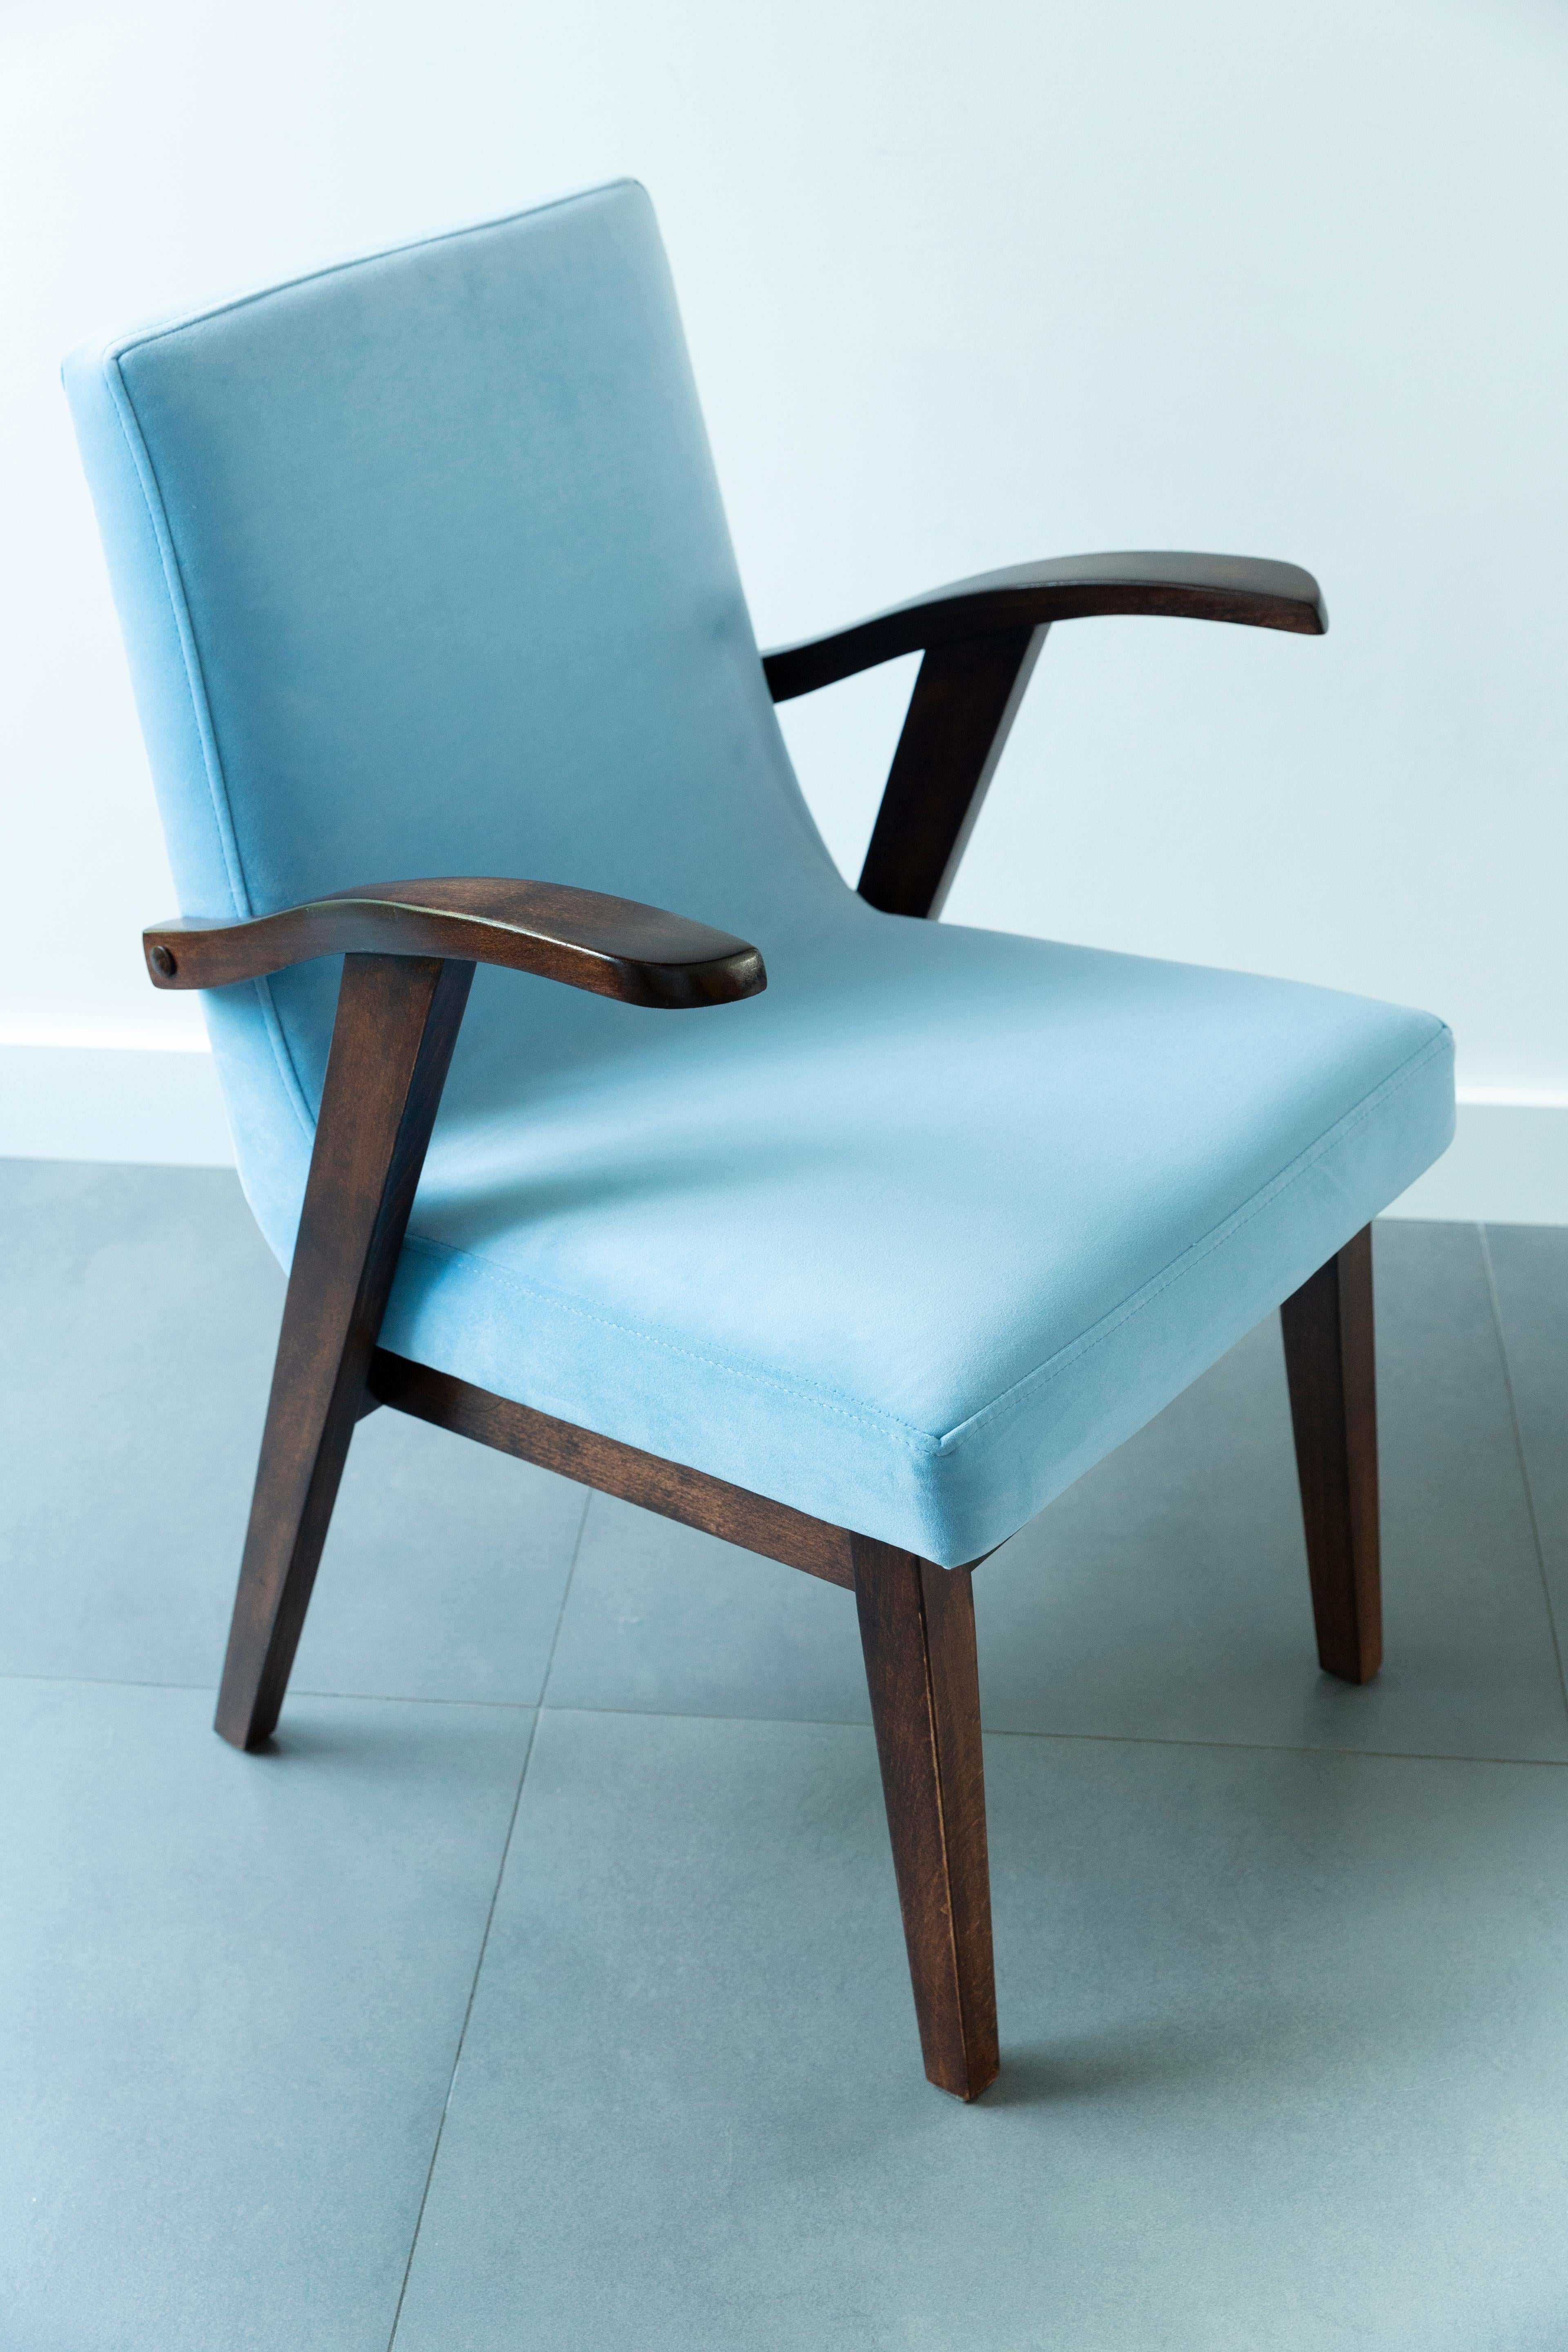 Set of Six 20th Century Armchairs in Baby Blue Velvet, Mieczyslaw Puchala, 1960s For Sale 1